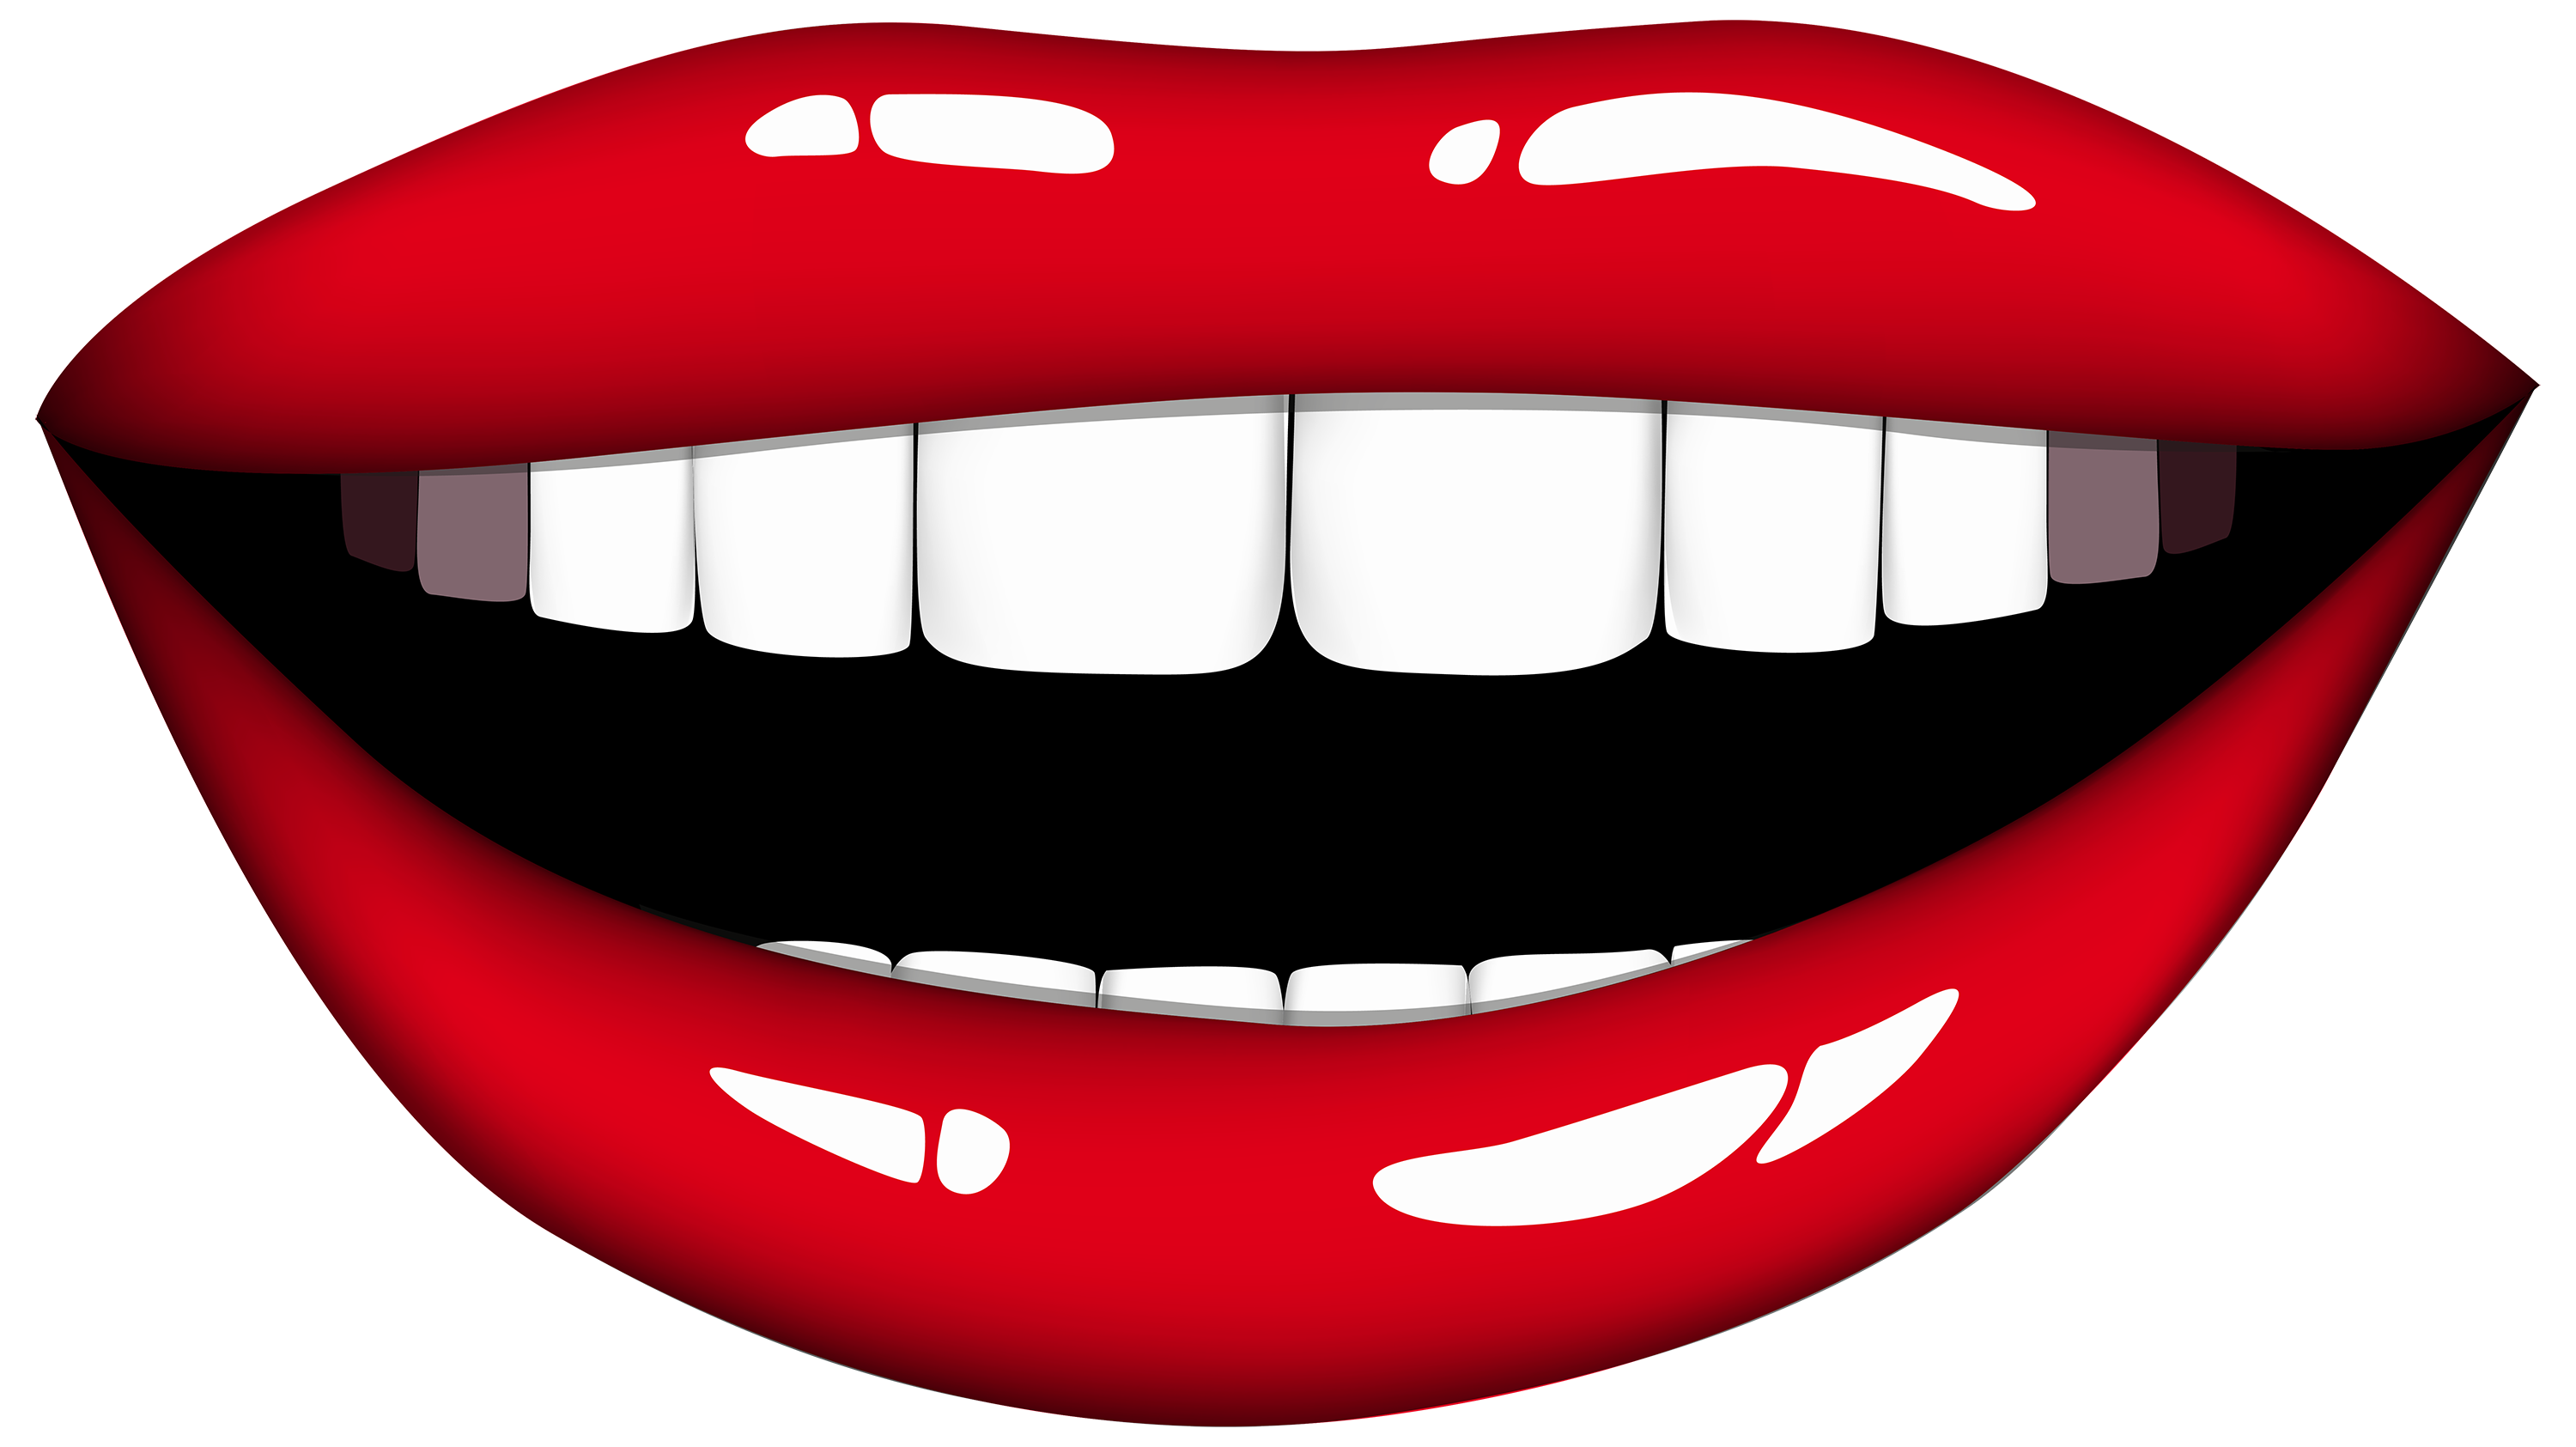 Talking mouth clipart free clipart images image #3399